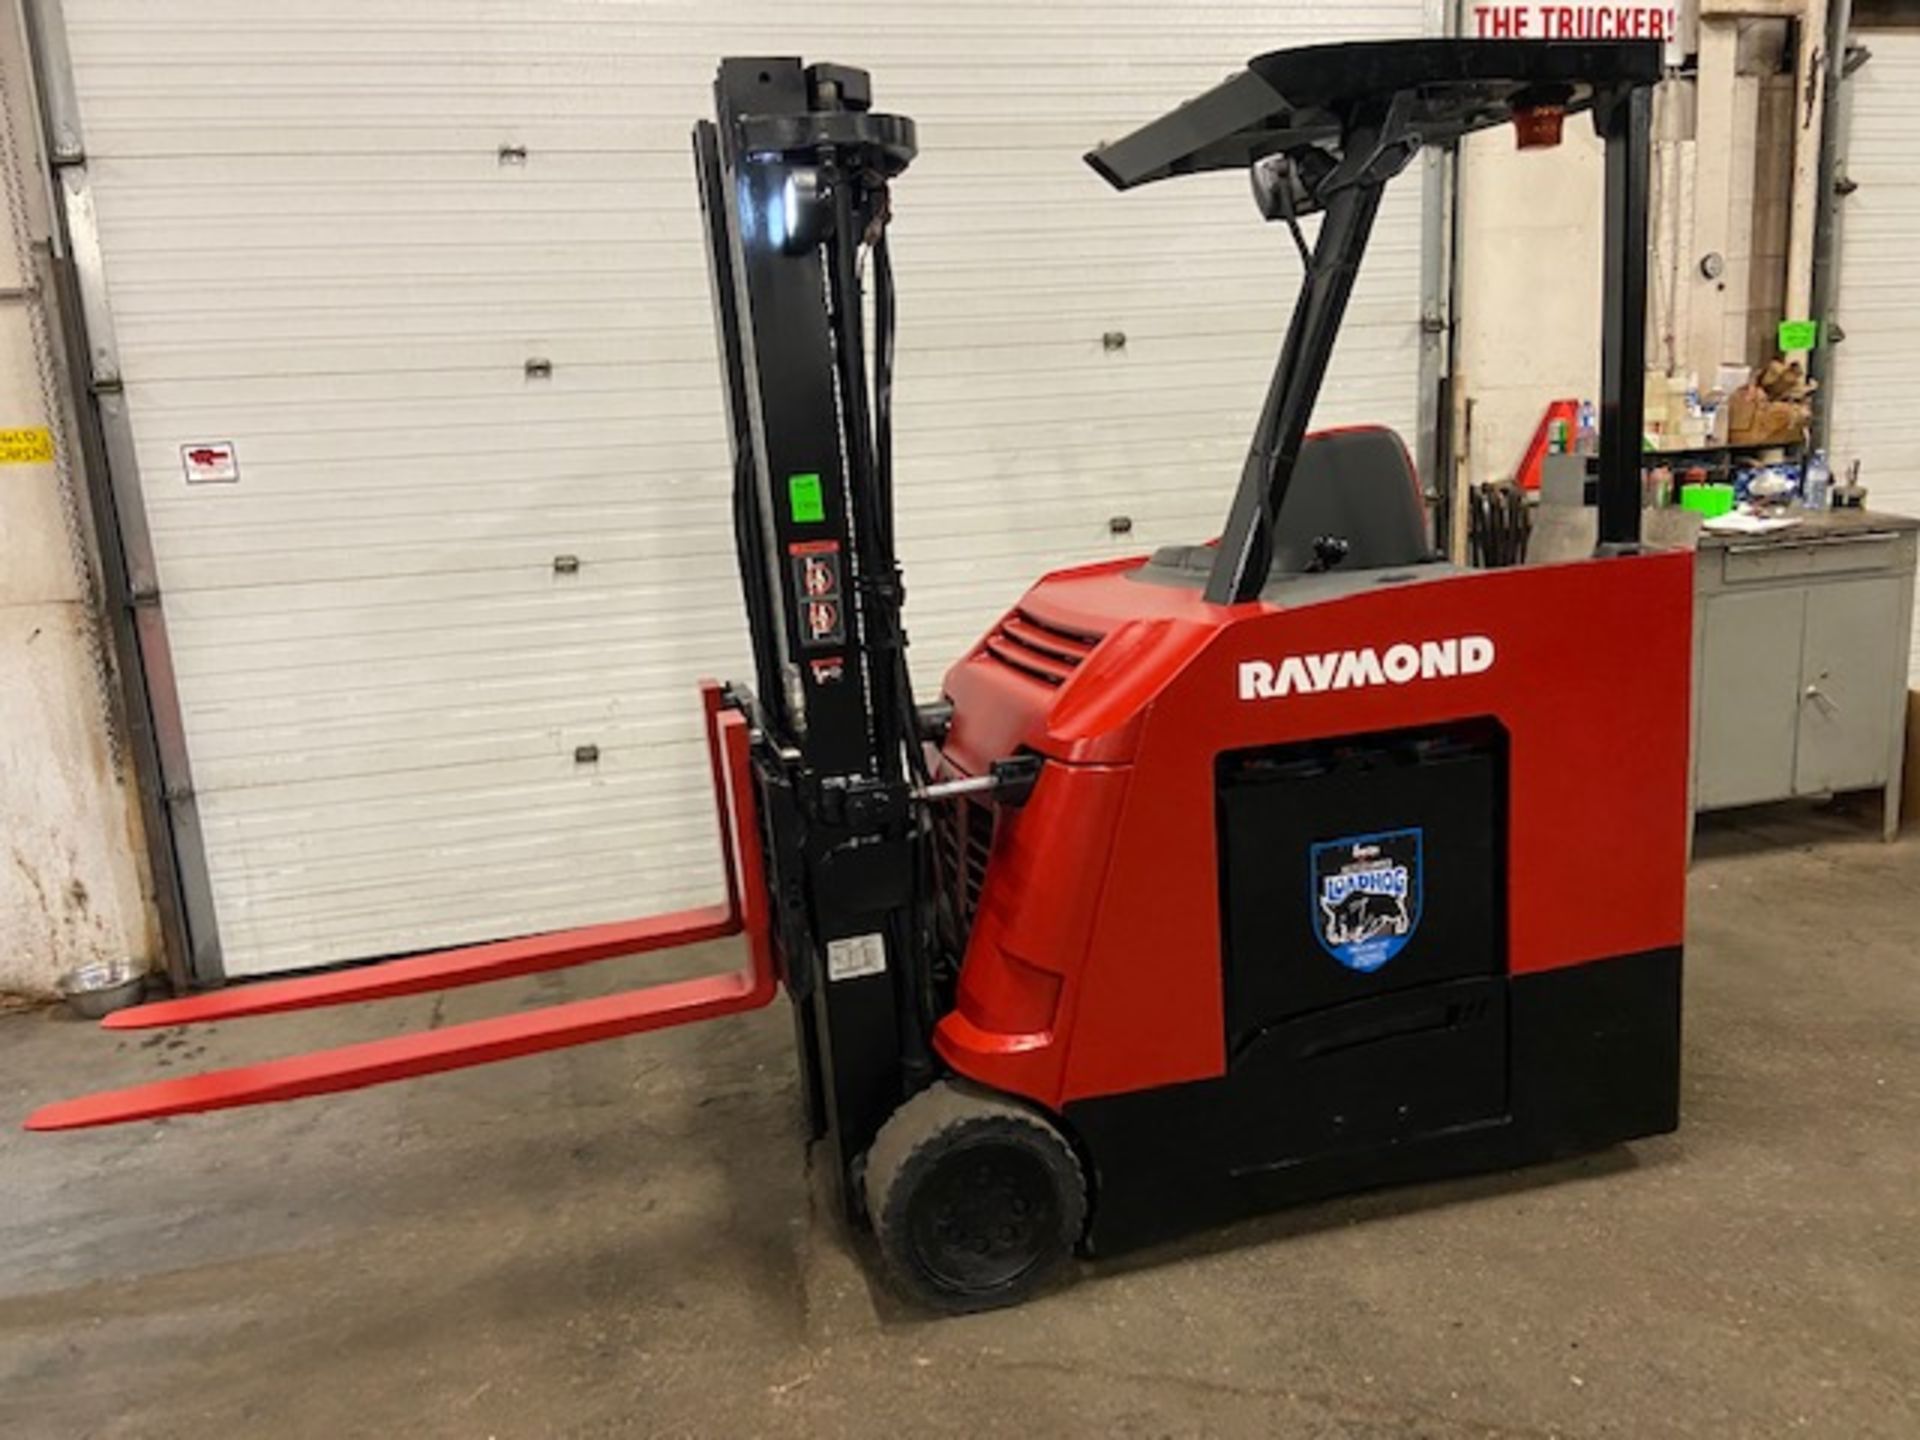 FREE CUSTOMS - 2016 Raymond 5000lbs Capacity Stand On Forklift Electric with 3-STAGE MAST